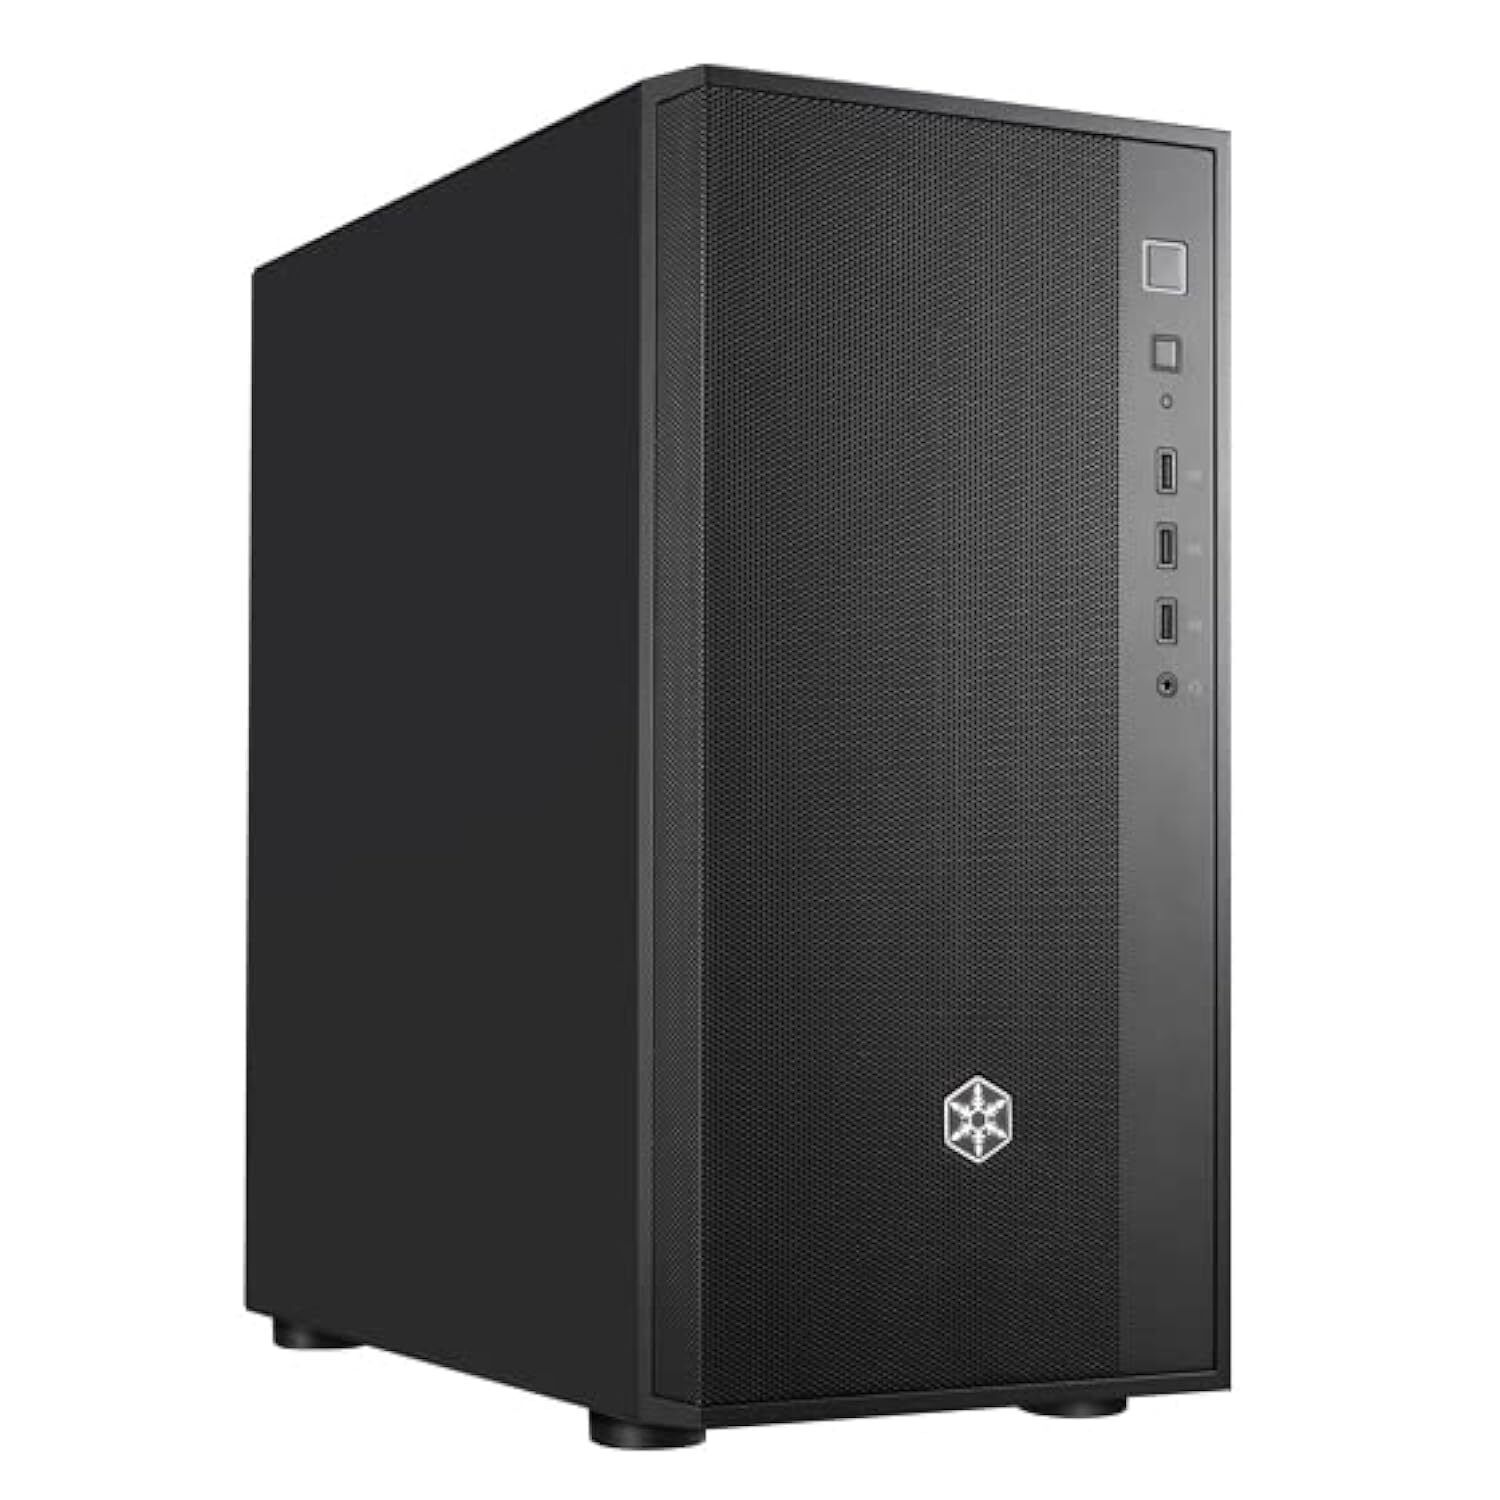 SilverStone Technology FARA R1 V2 Stylish and High Airflow Mid Tower ATX Chass